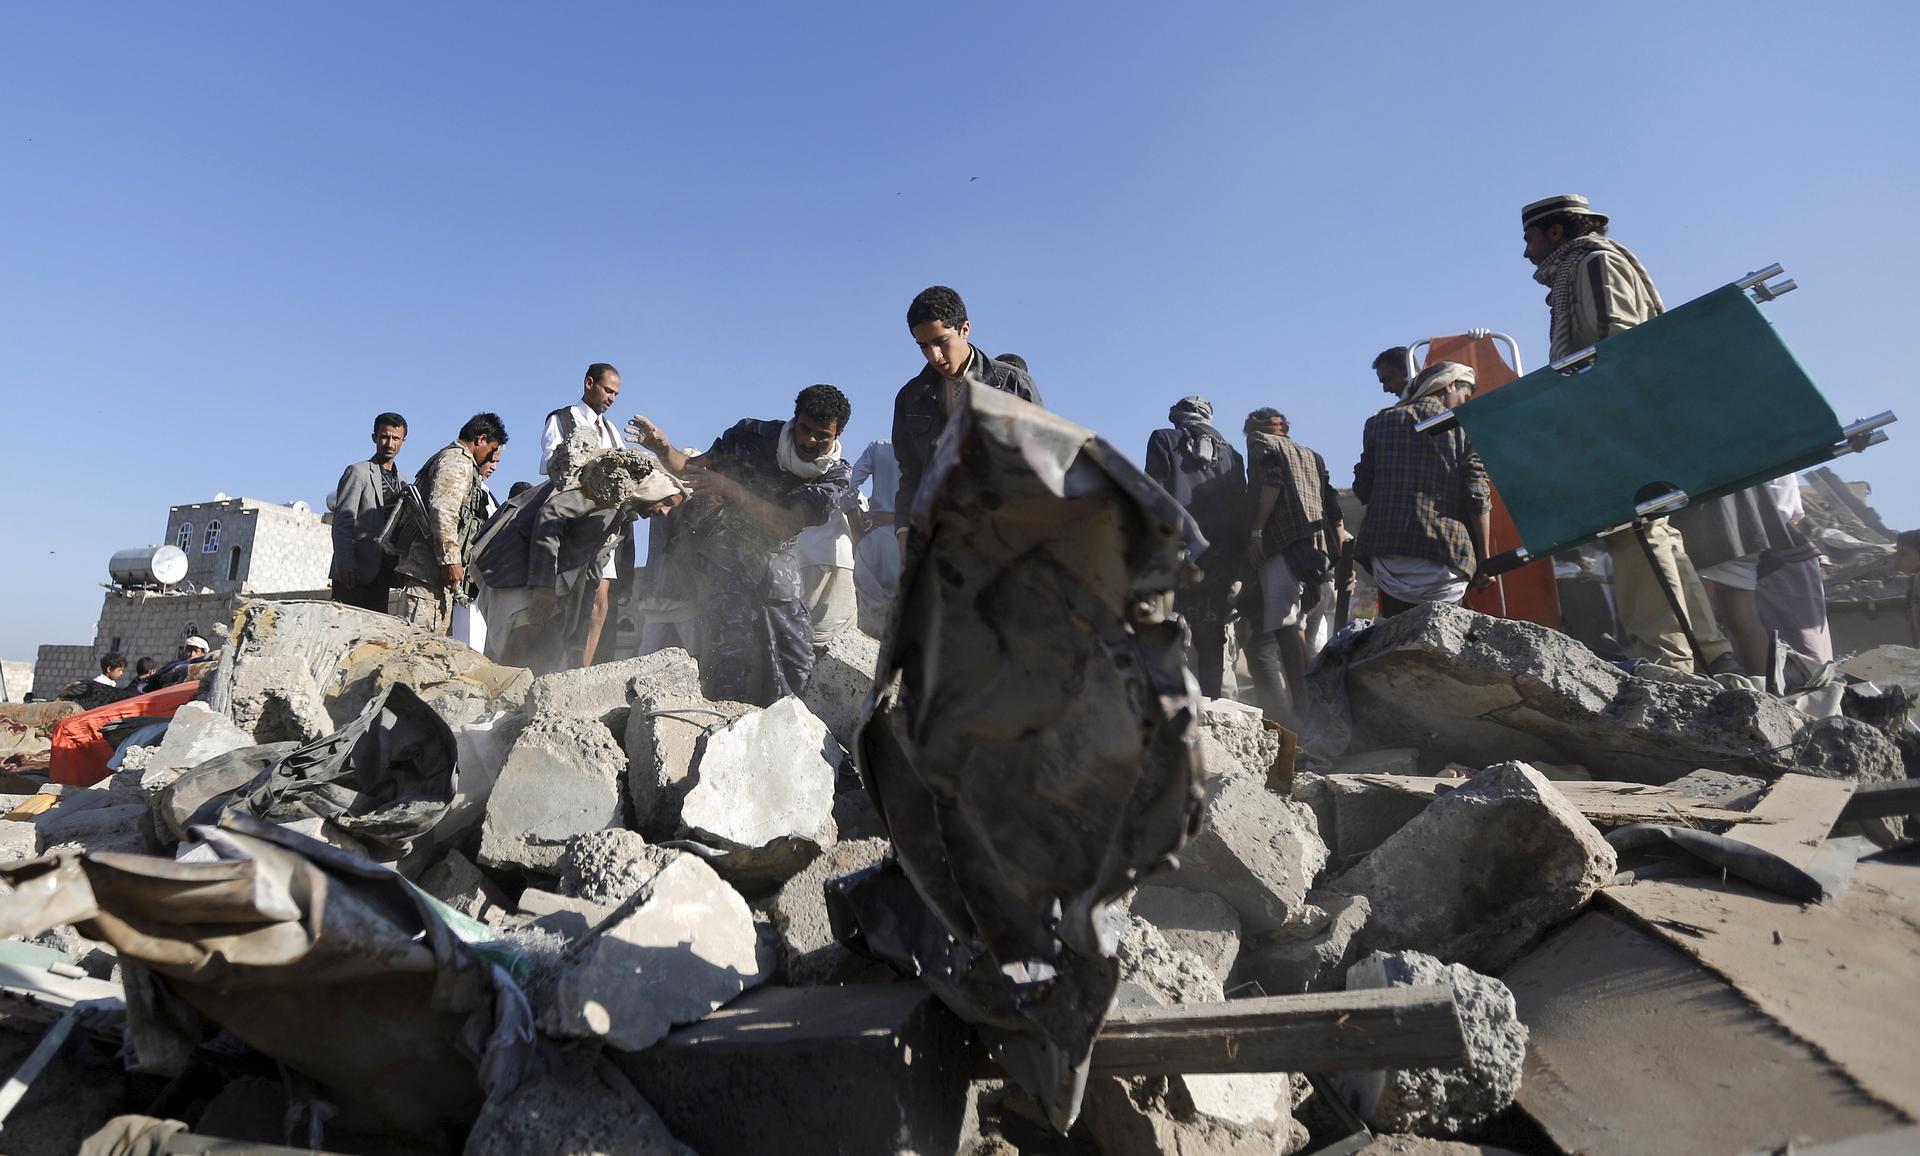 People search for survivors under the rubble of houses destroyed by an air strike near the Sanaa airport on March 26, 2015.